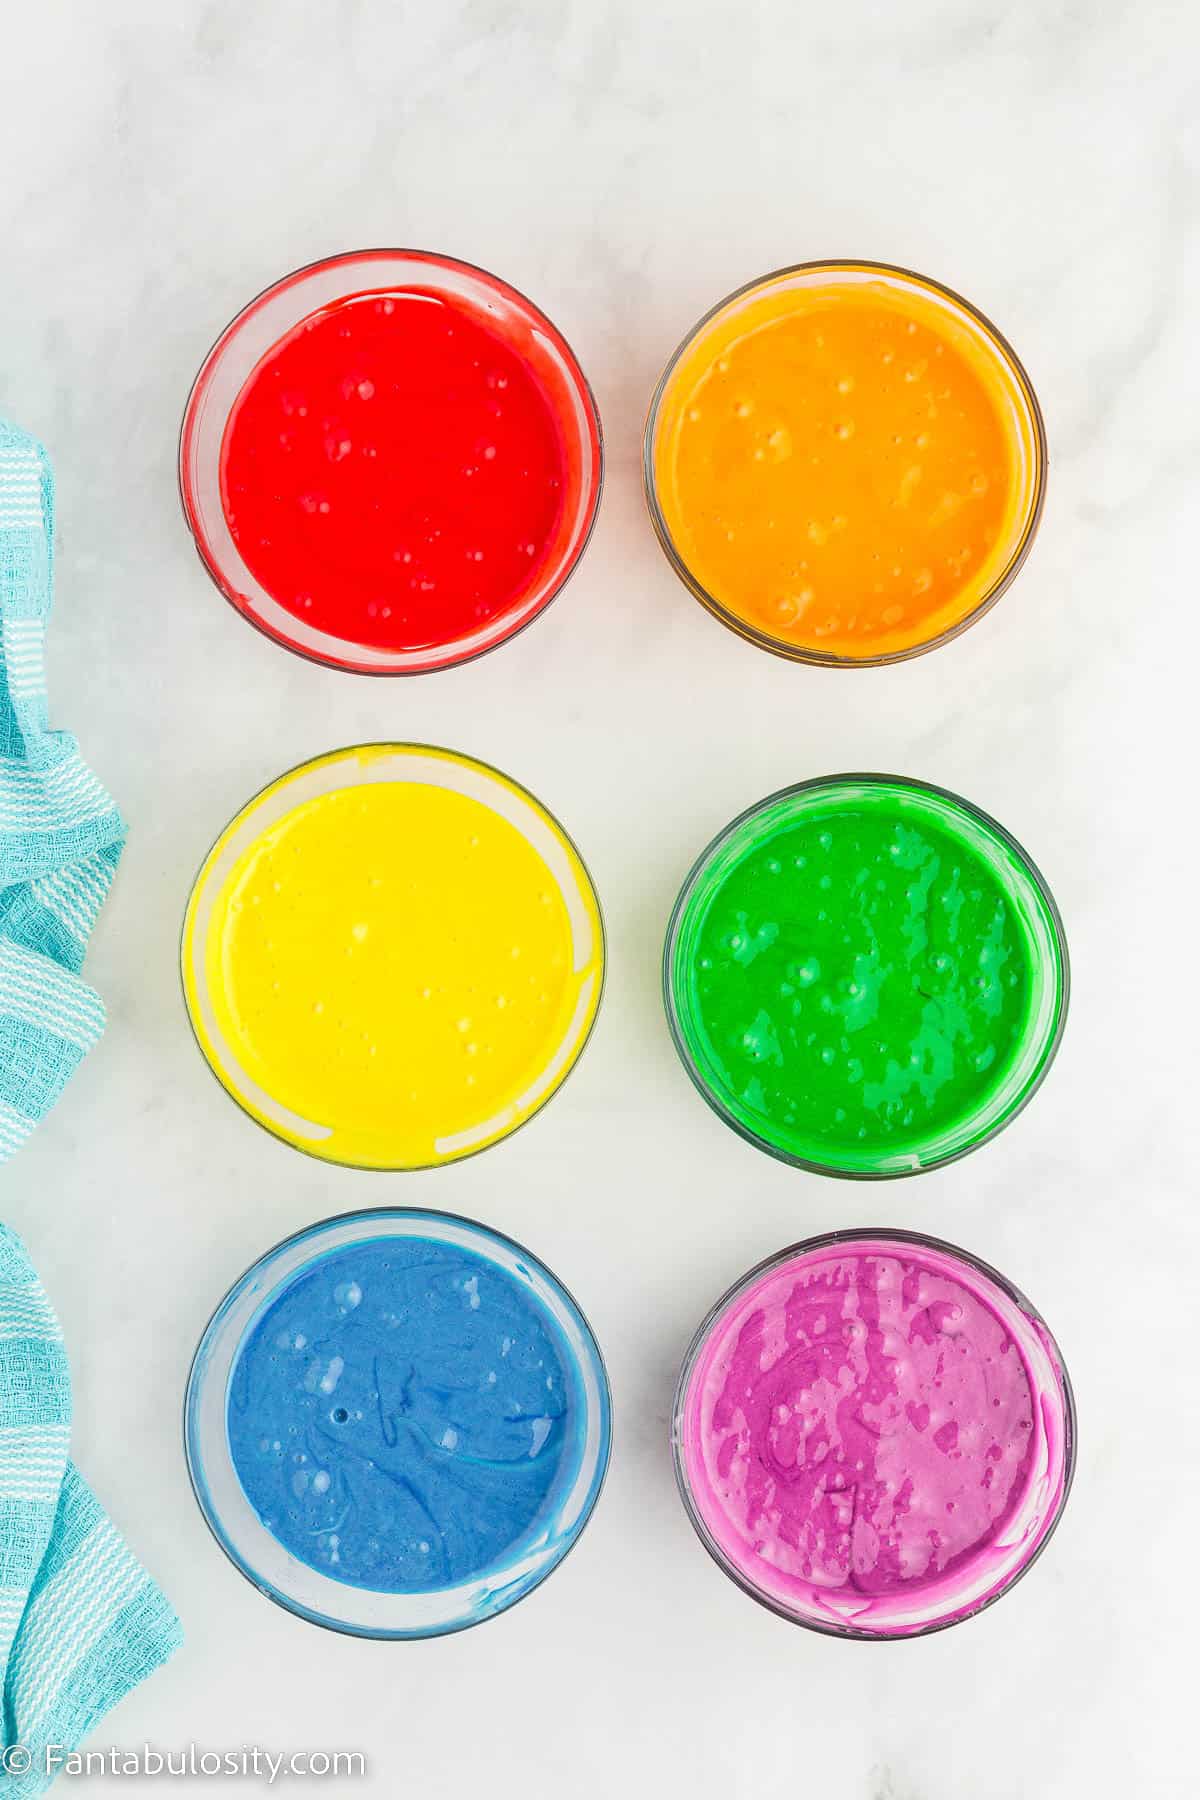 Food coloring added to waffle batter, in small clear glass bowls.